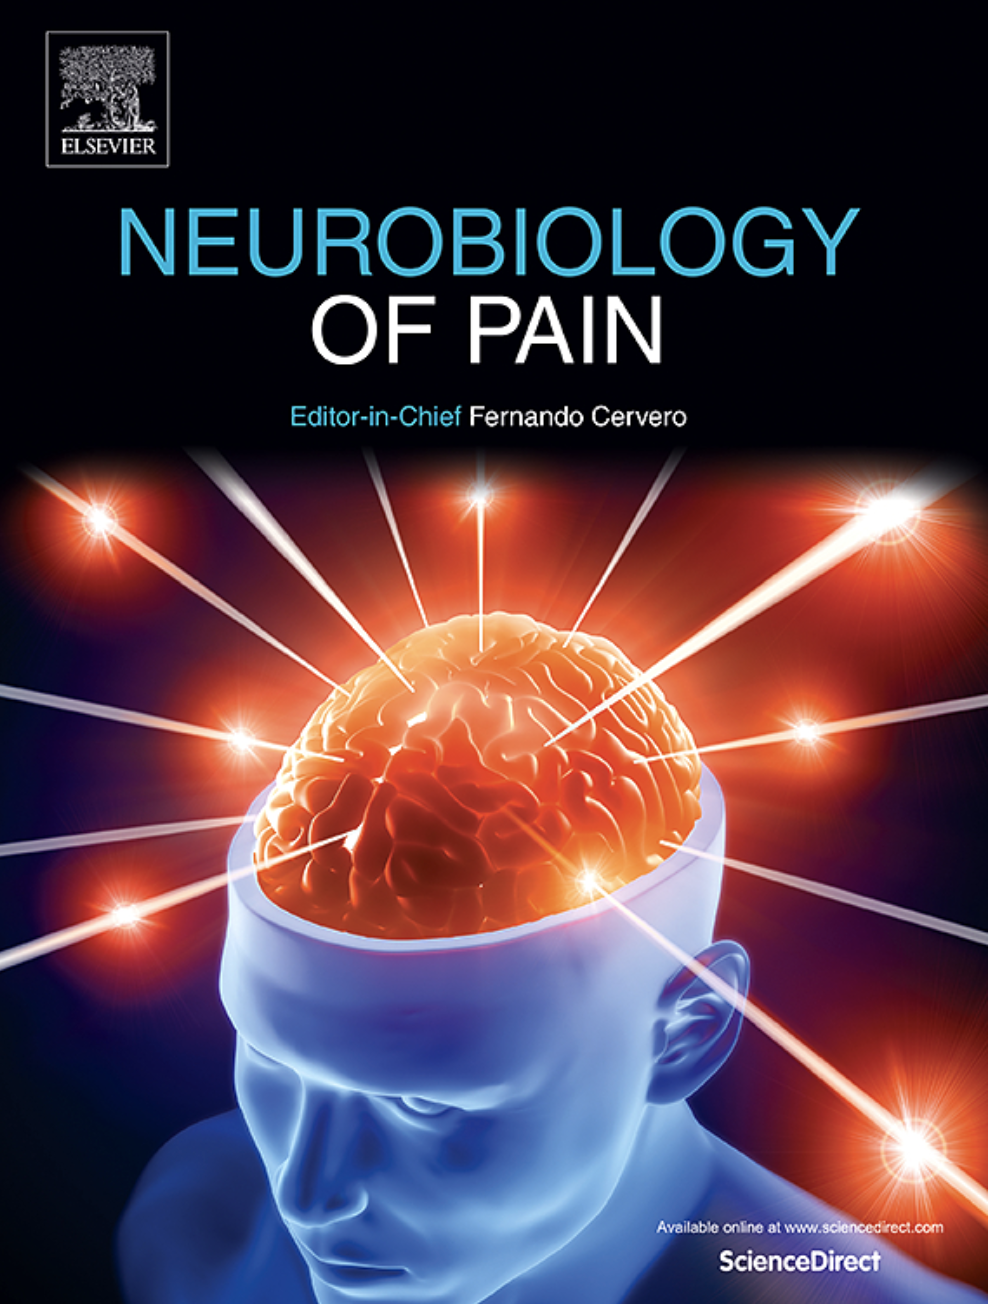 research on pain